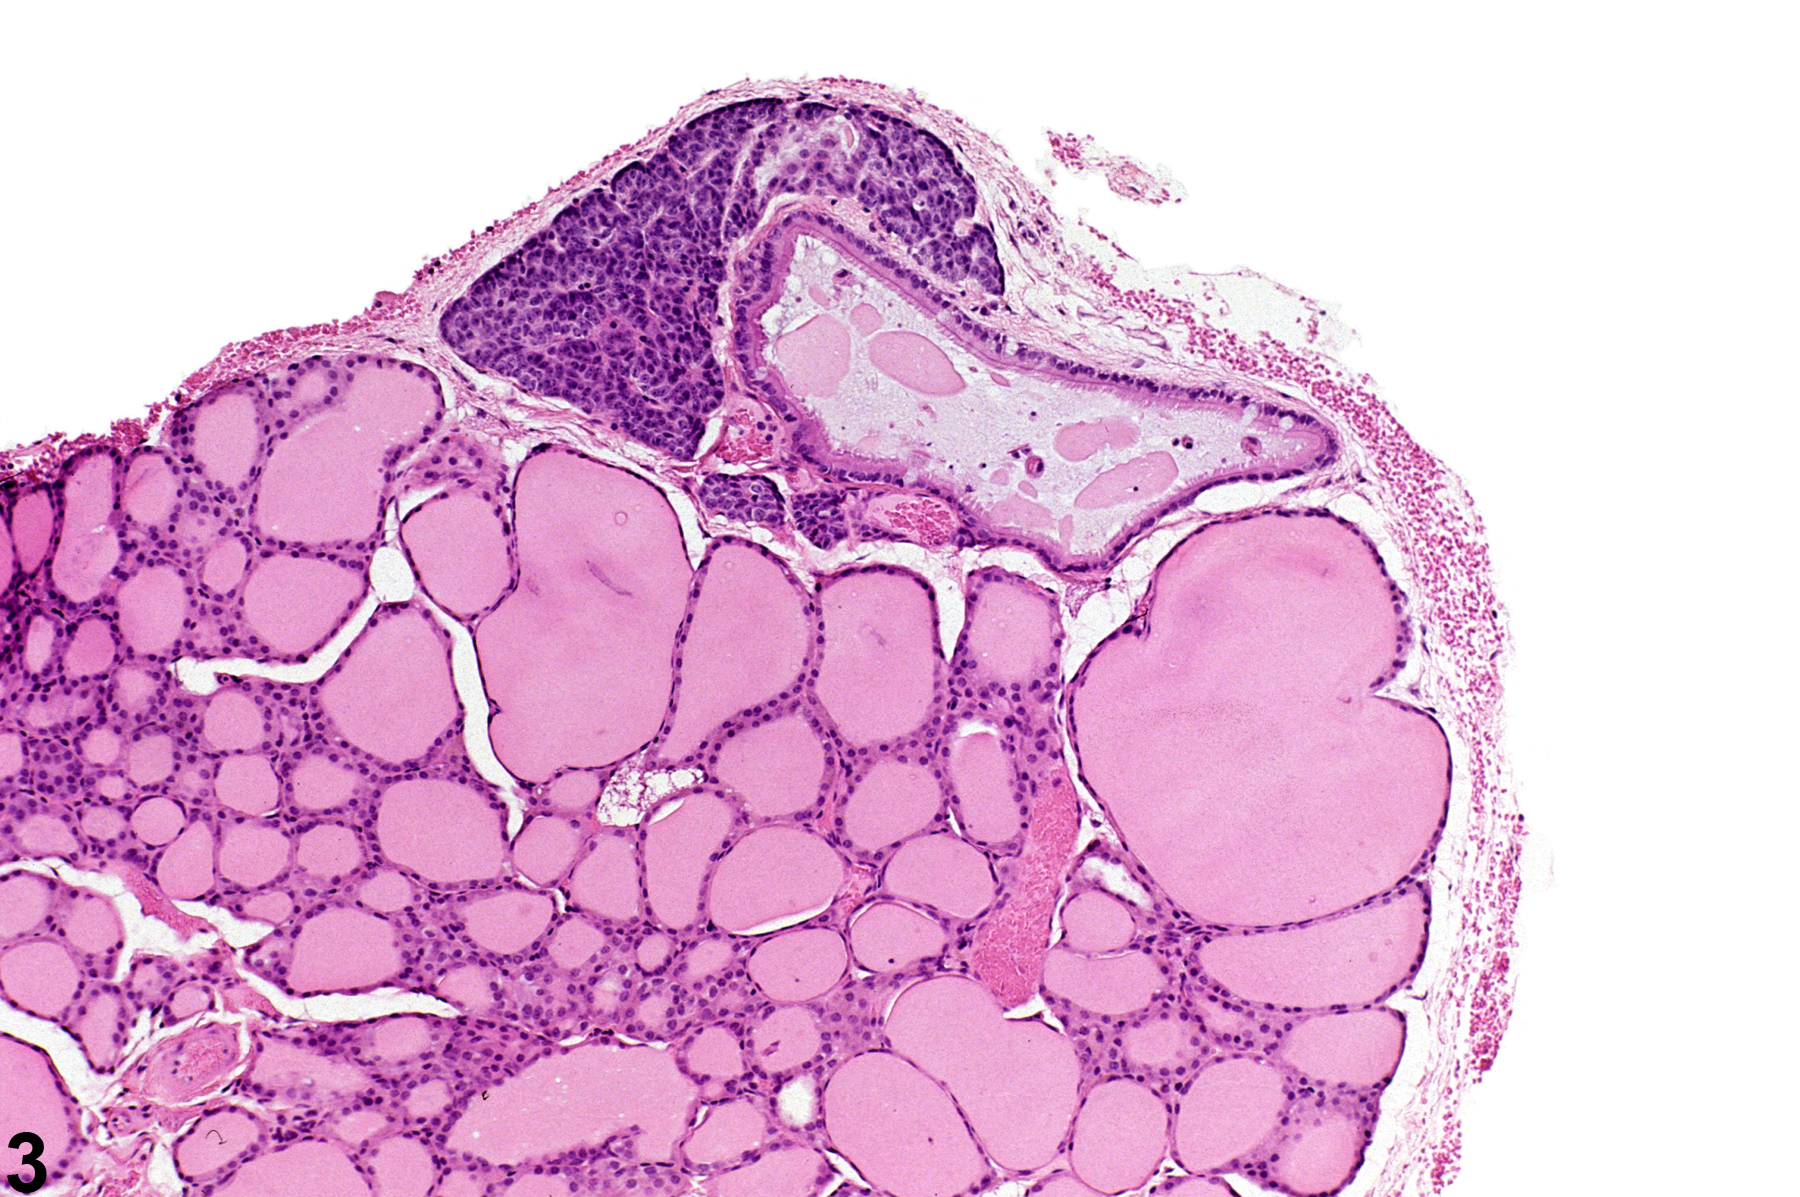 Image of cyst, congenital in the parathyroid gland from a male B6C3F1 mouse in a chronic study